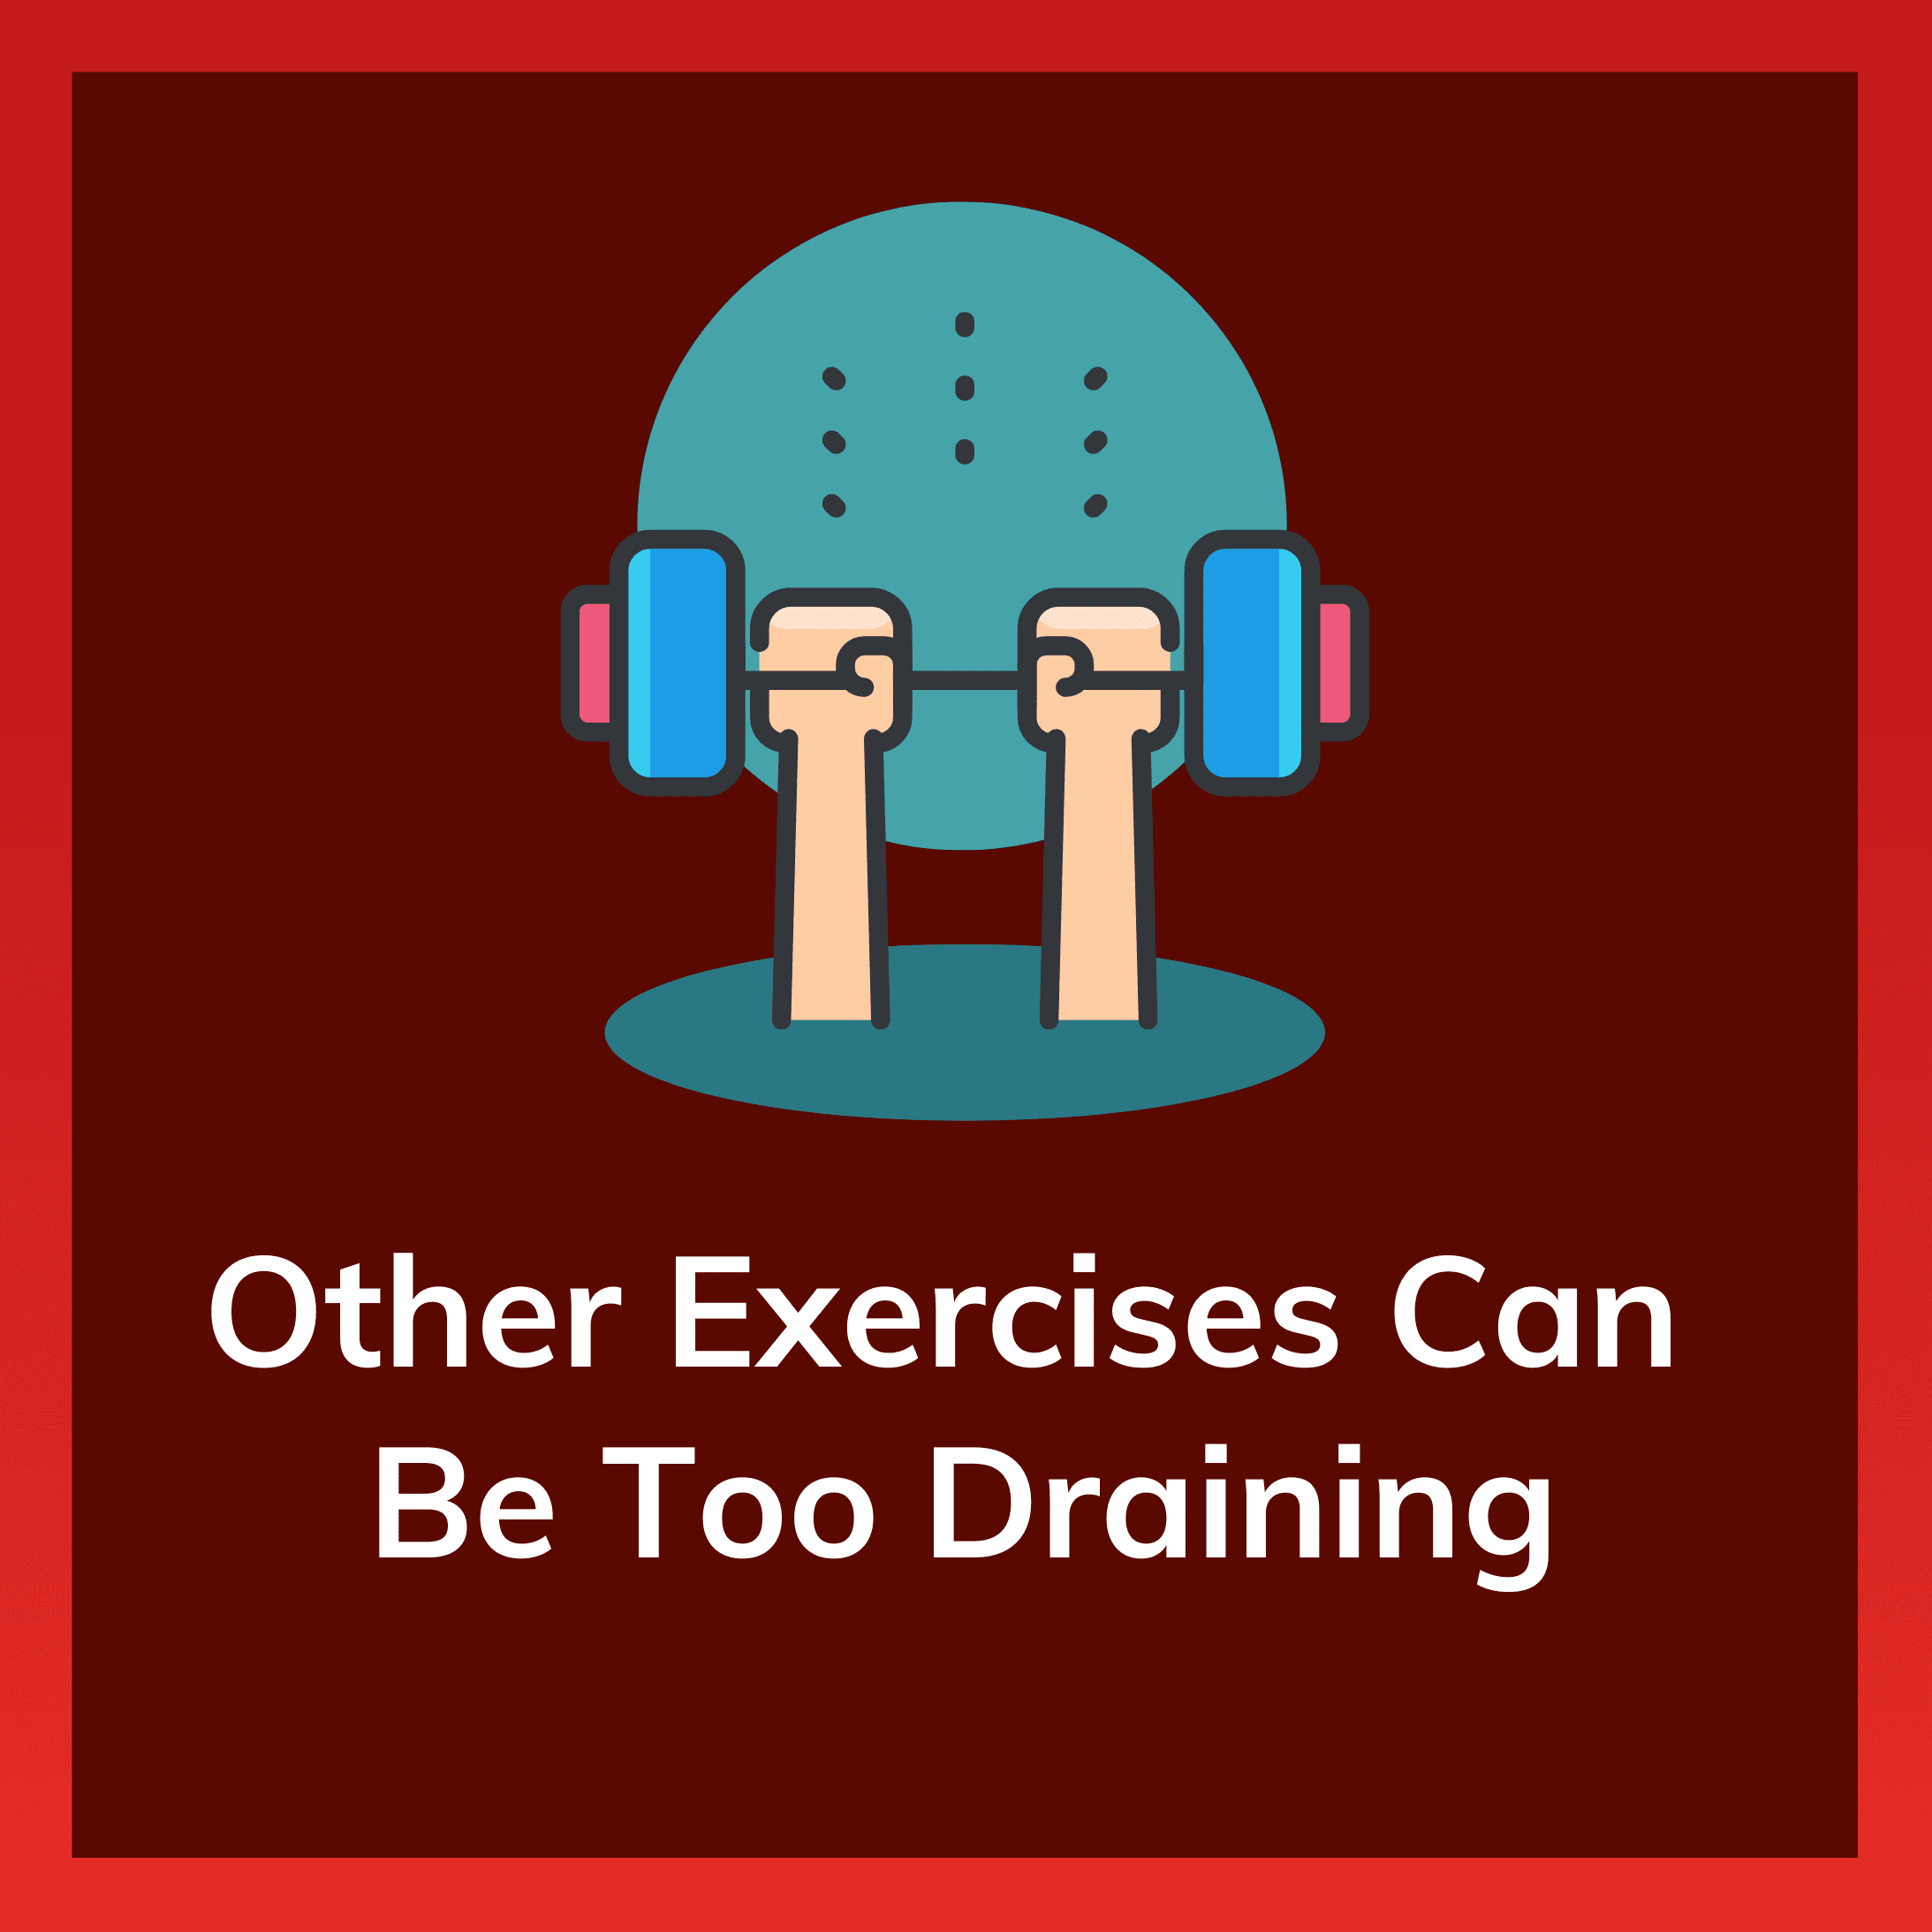 Other Exercises Can Be Too Draining